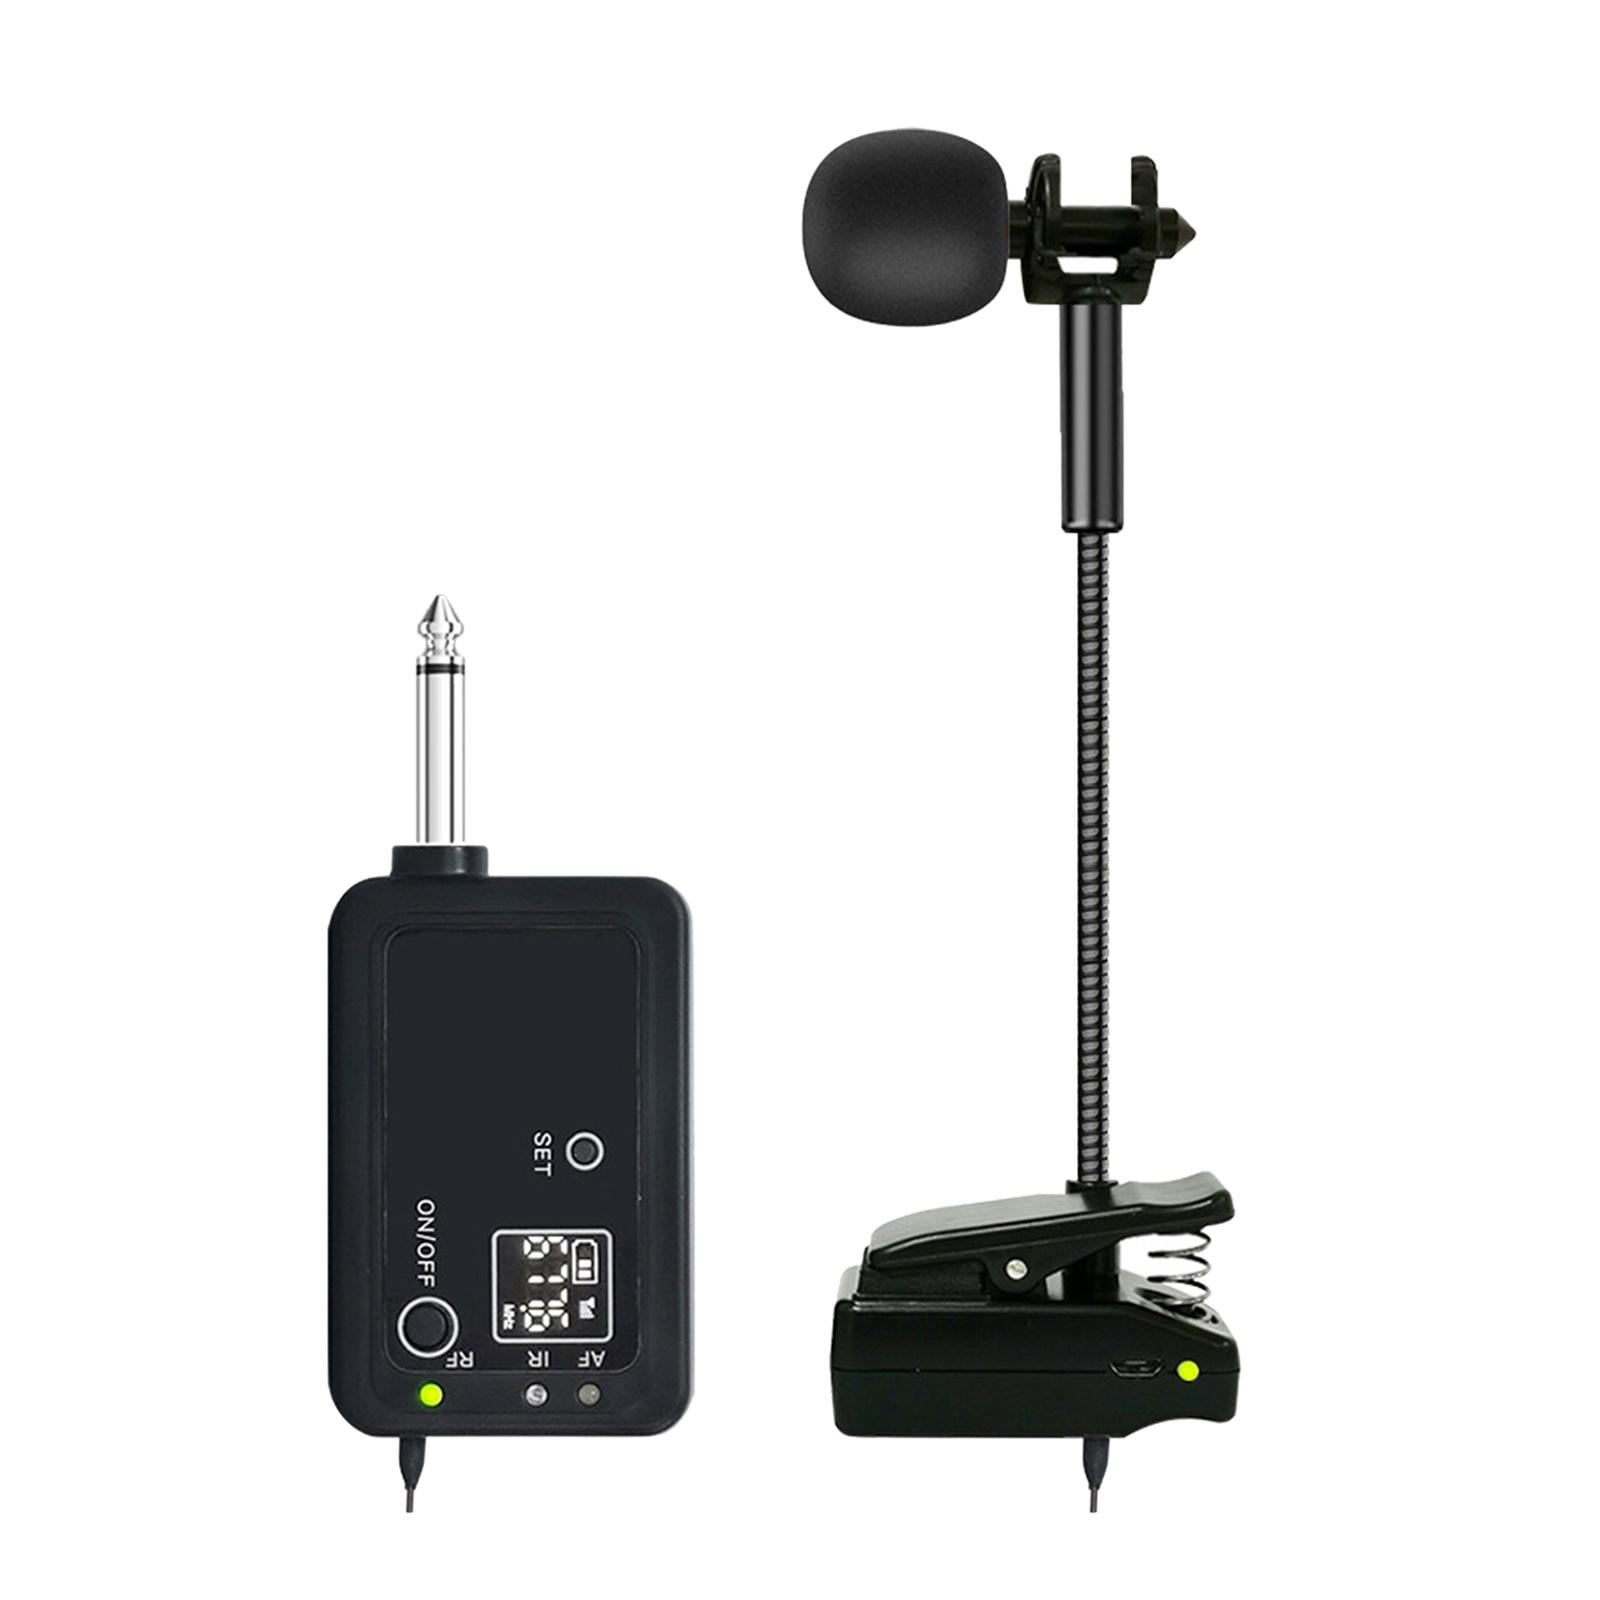 Wireless Saxophone Microphone UHF for Musical Instruments Speaker Voice Amplifier with Receiver Clip Professional Orchestra Trumpet Saxo HiFi Megaphone Condenser Portable Handheld Mini Mic